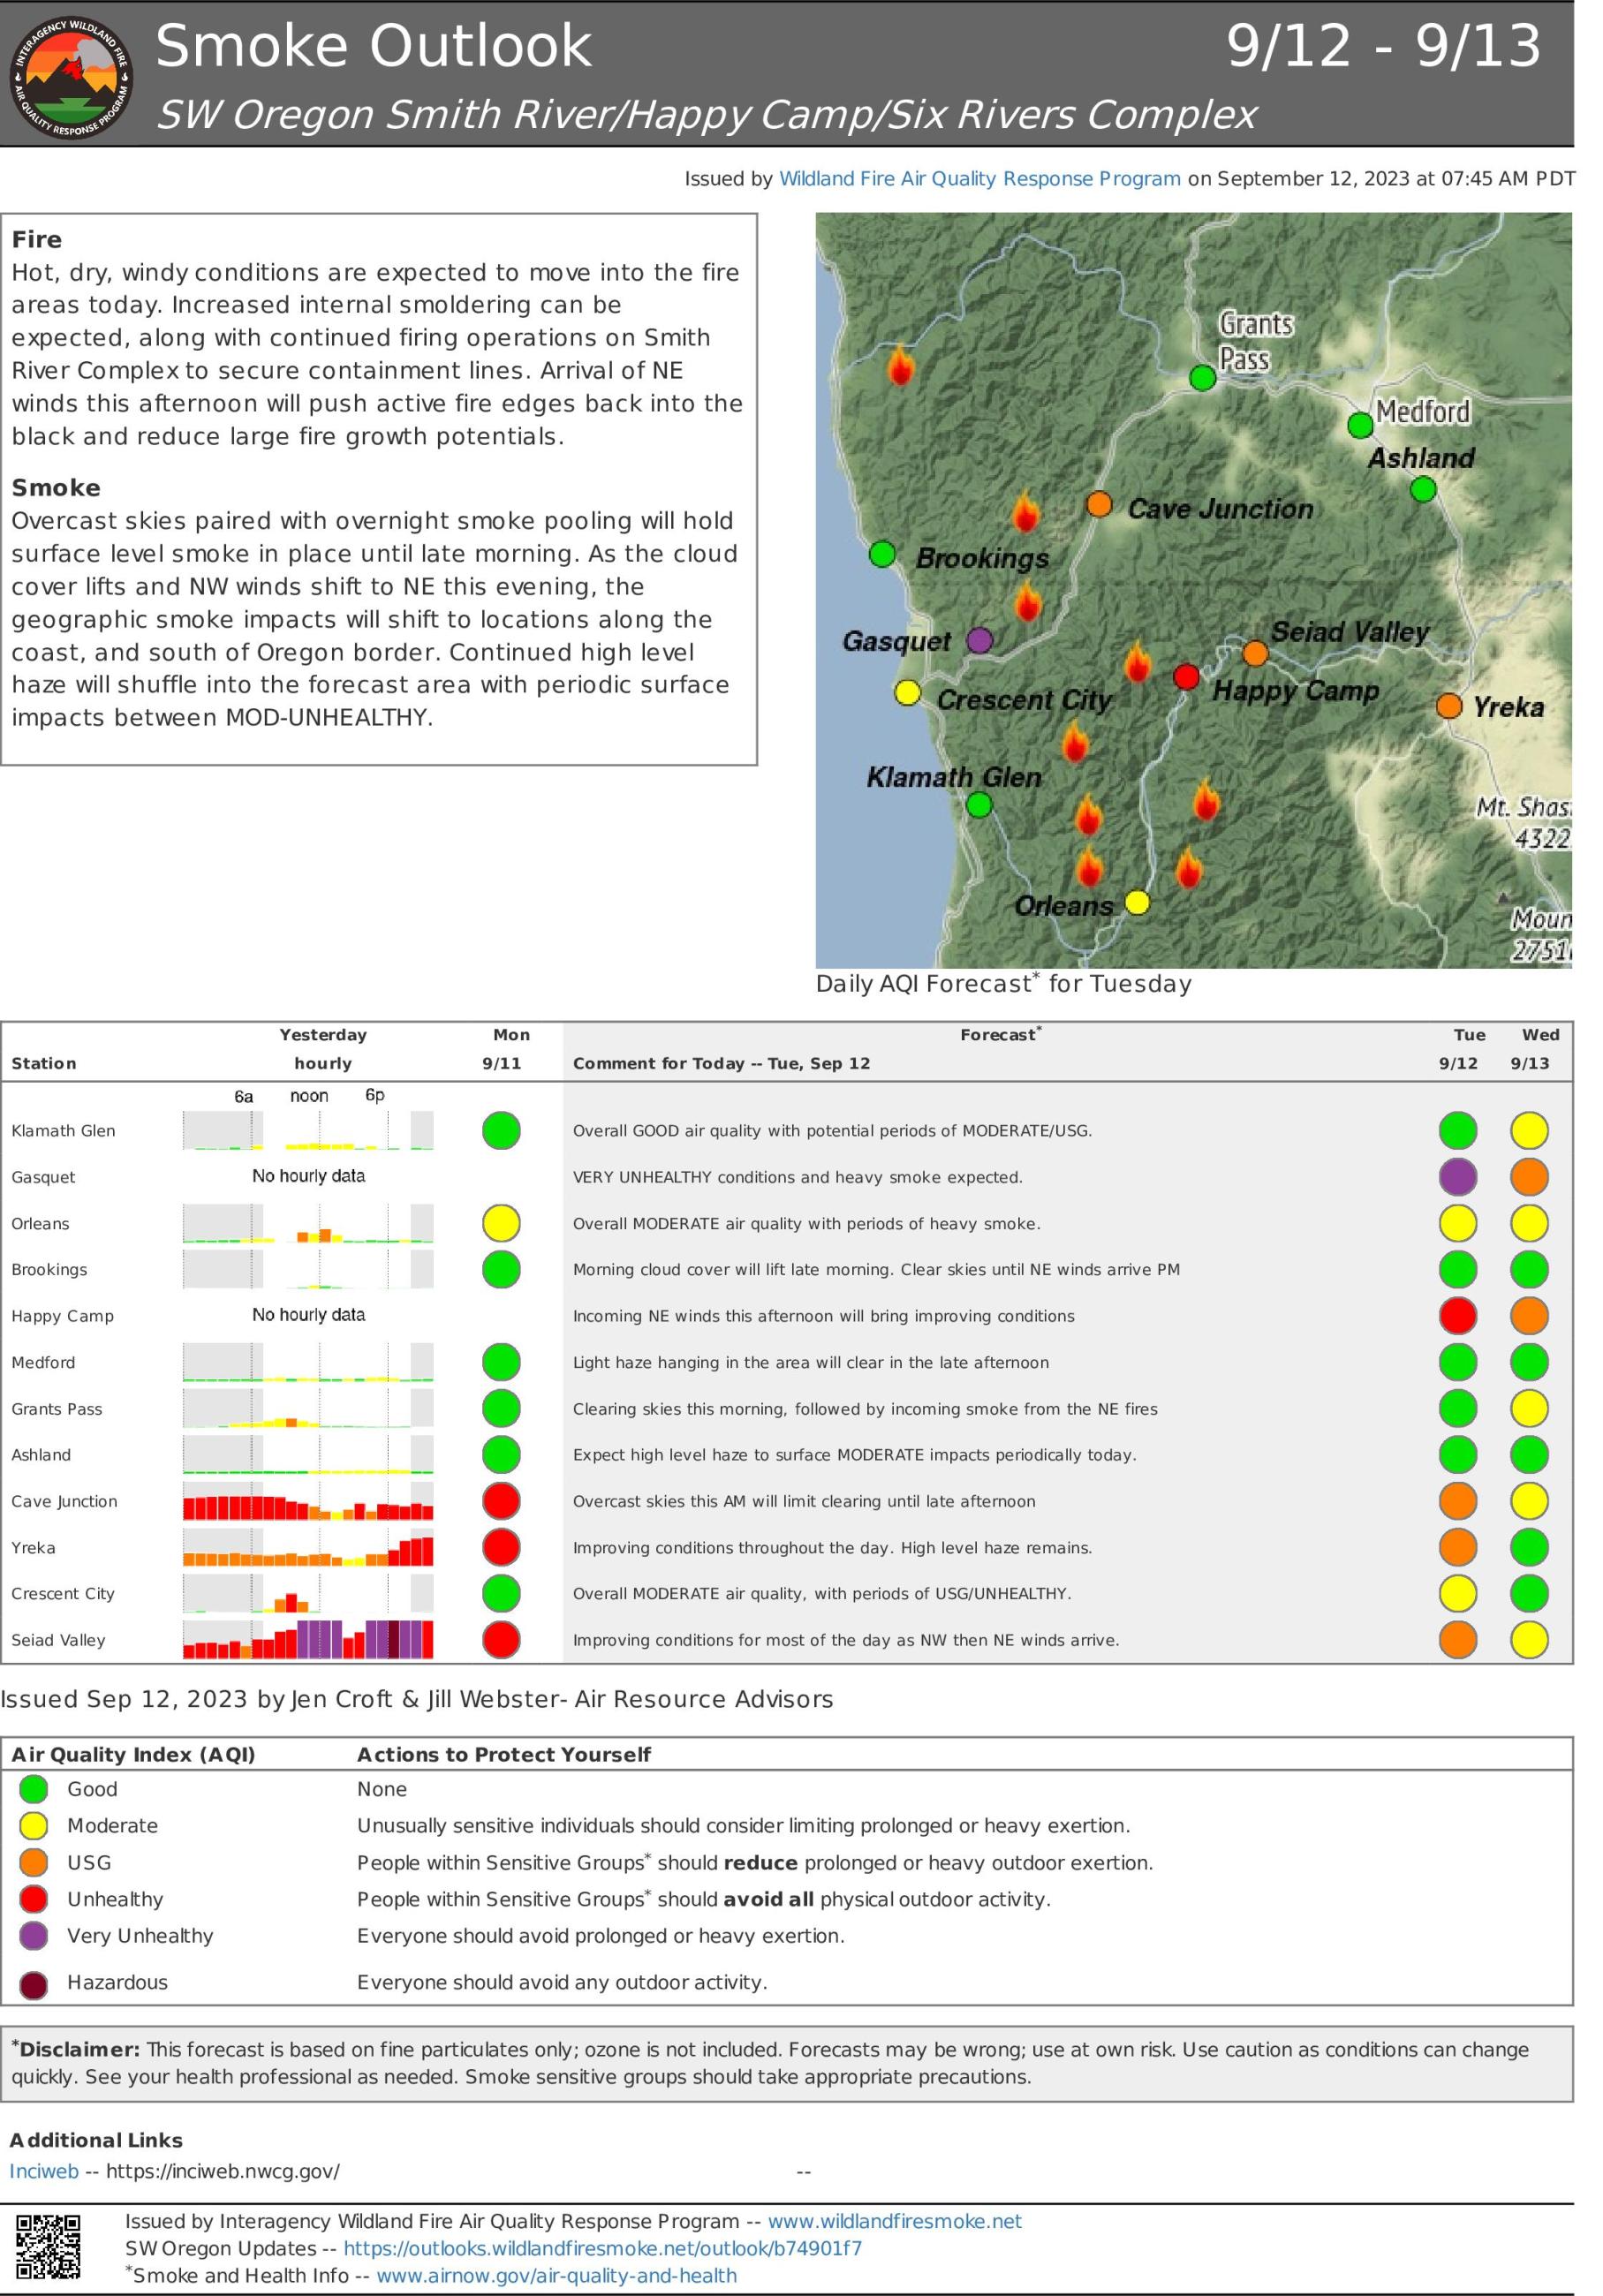 Smoke Update Smith River Complex September 12-13, 2023